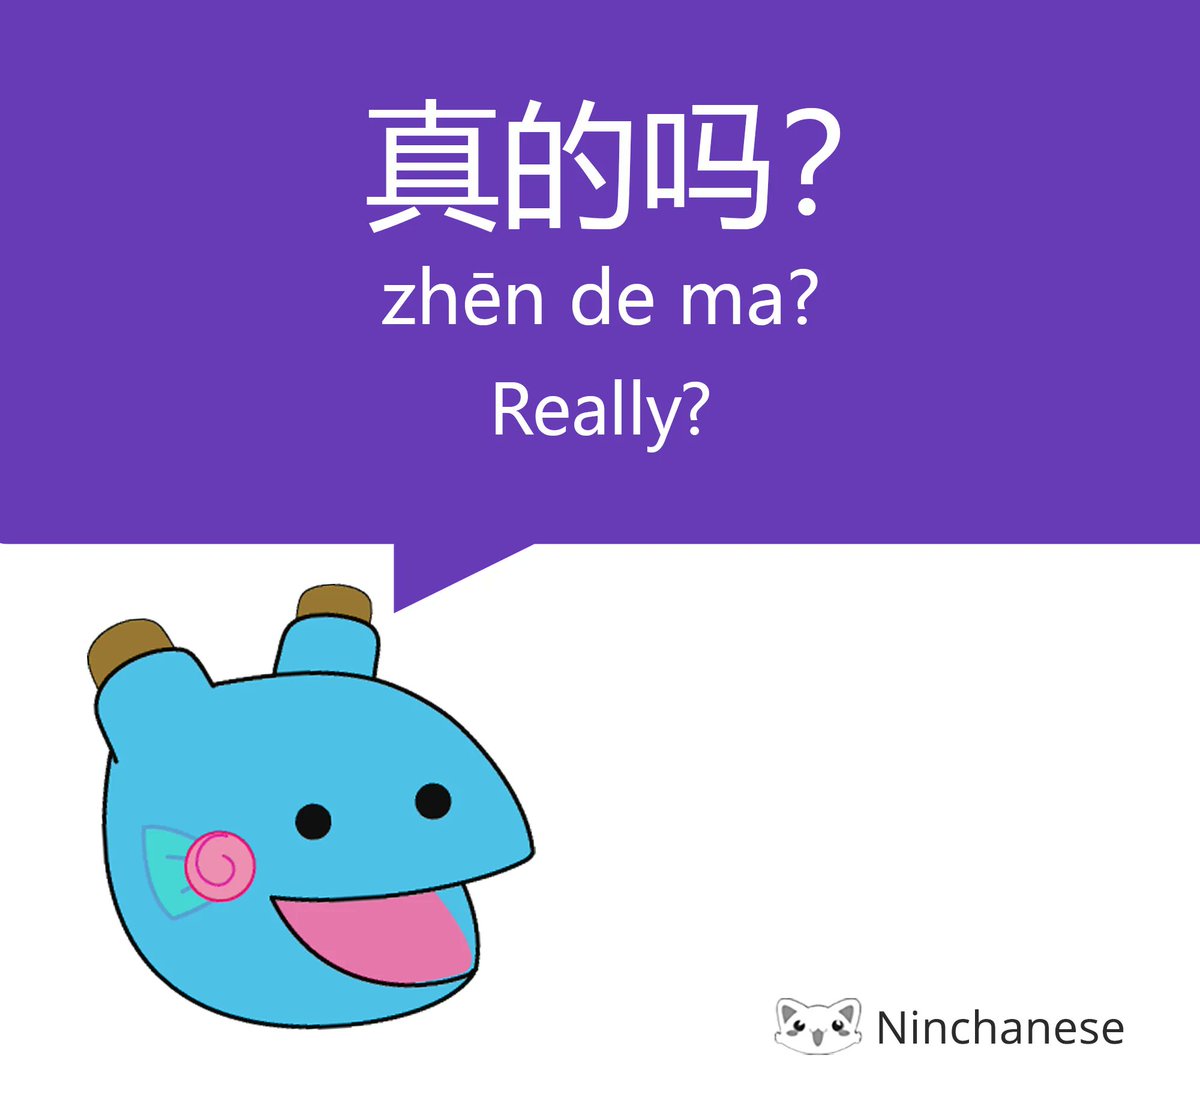 Try using '真的吗？' to express your surprise or doubt and keep learning Chinese with Ninchanese!

#learnchinese #ninchanese #chinesewithnincha #china #chinese #chineseculture #learnmandarin #HSK #chineselearner #languagelearning #studygram #dailylearning #chineselessons #cute